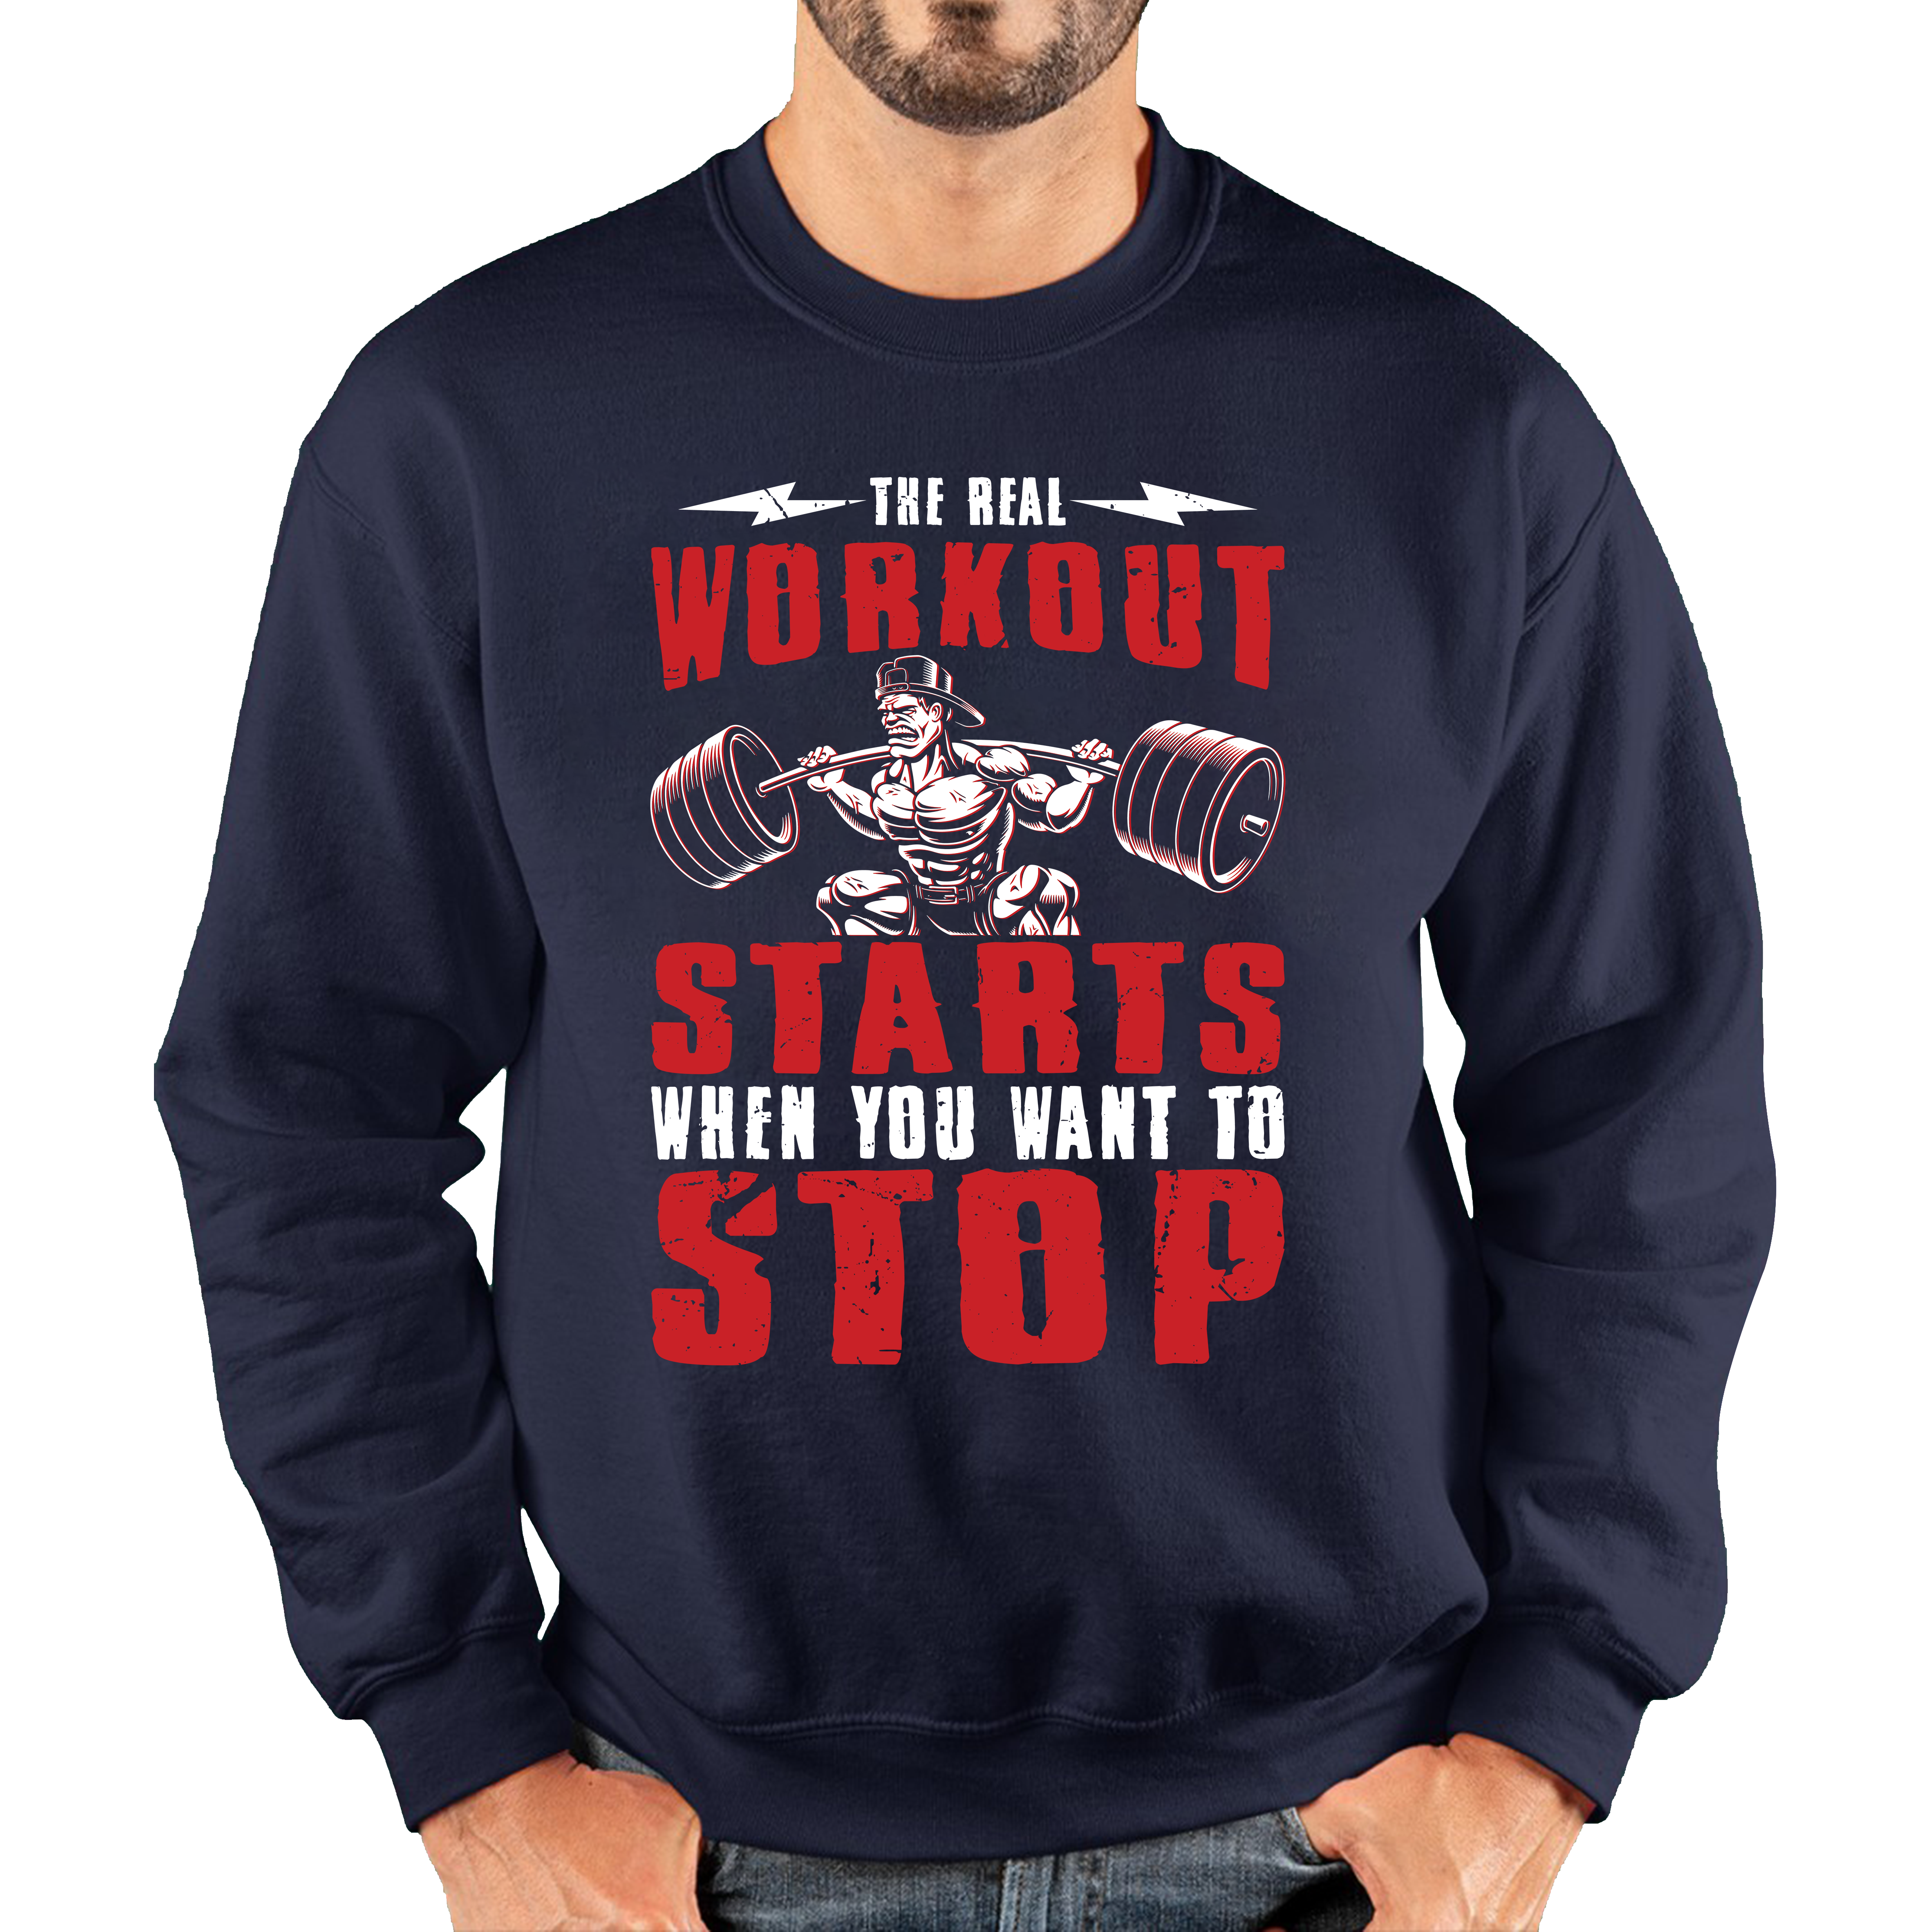 The Real Workout Starts When You Want To Stop Motivational Gym Adult Sweatshirt